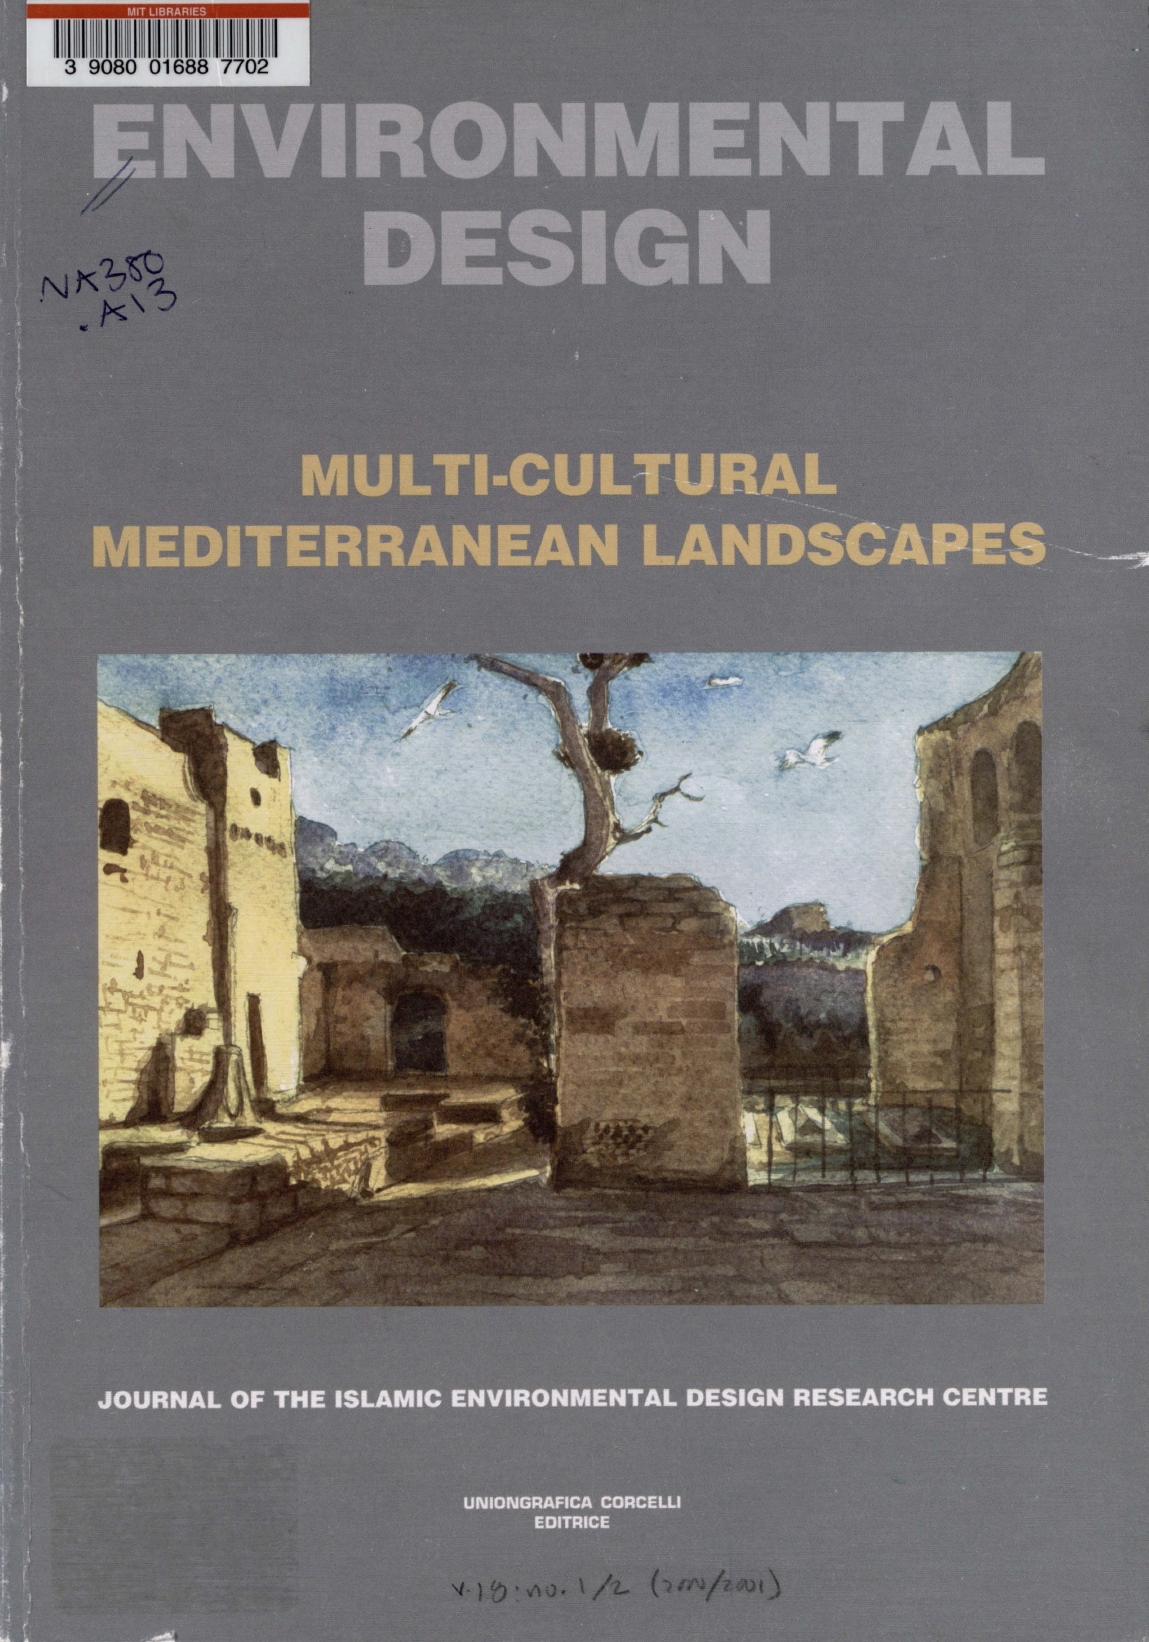 Michele Stella - <span style="color: rgb(1, 1, 1); line-height: 16px;">Environmental Design was a series edited by Attilio Petruccioli, that promoted and coordinated higher studies and research in the field of architecture, and urban and rural planning pertaining to the Islamic world. With a particular focus on the interface between people and their habitat, including housing, dwellings and settlement patterns, this journal was committed to realizing certain goals: an effective interplay between the different areas in urban studies, and a solid relationship of collaboration and exchange of technical expertise between major institutions committed to similar research.</span>